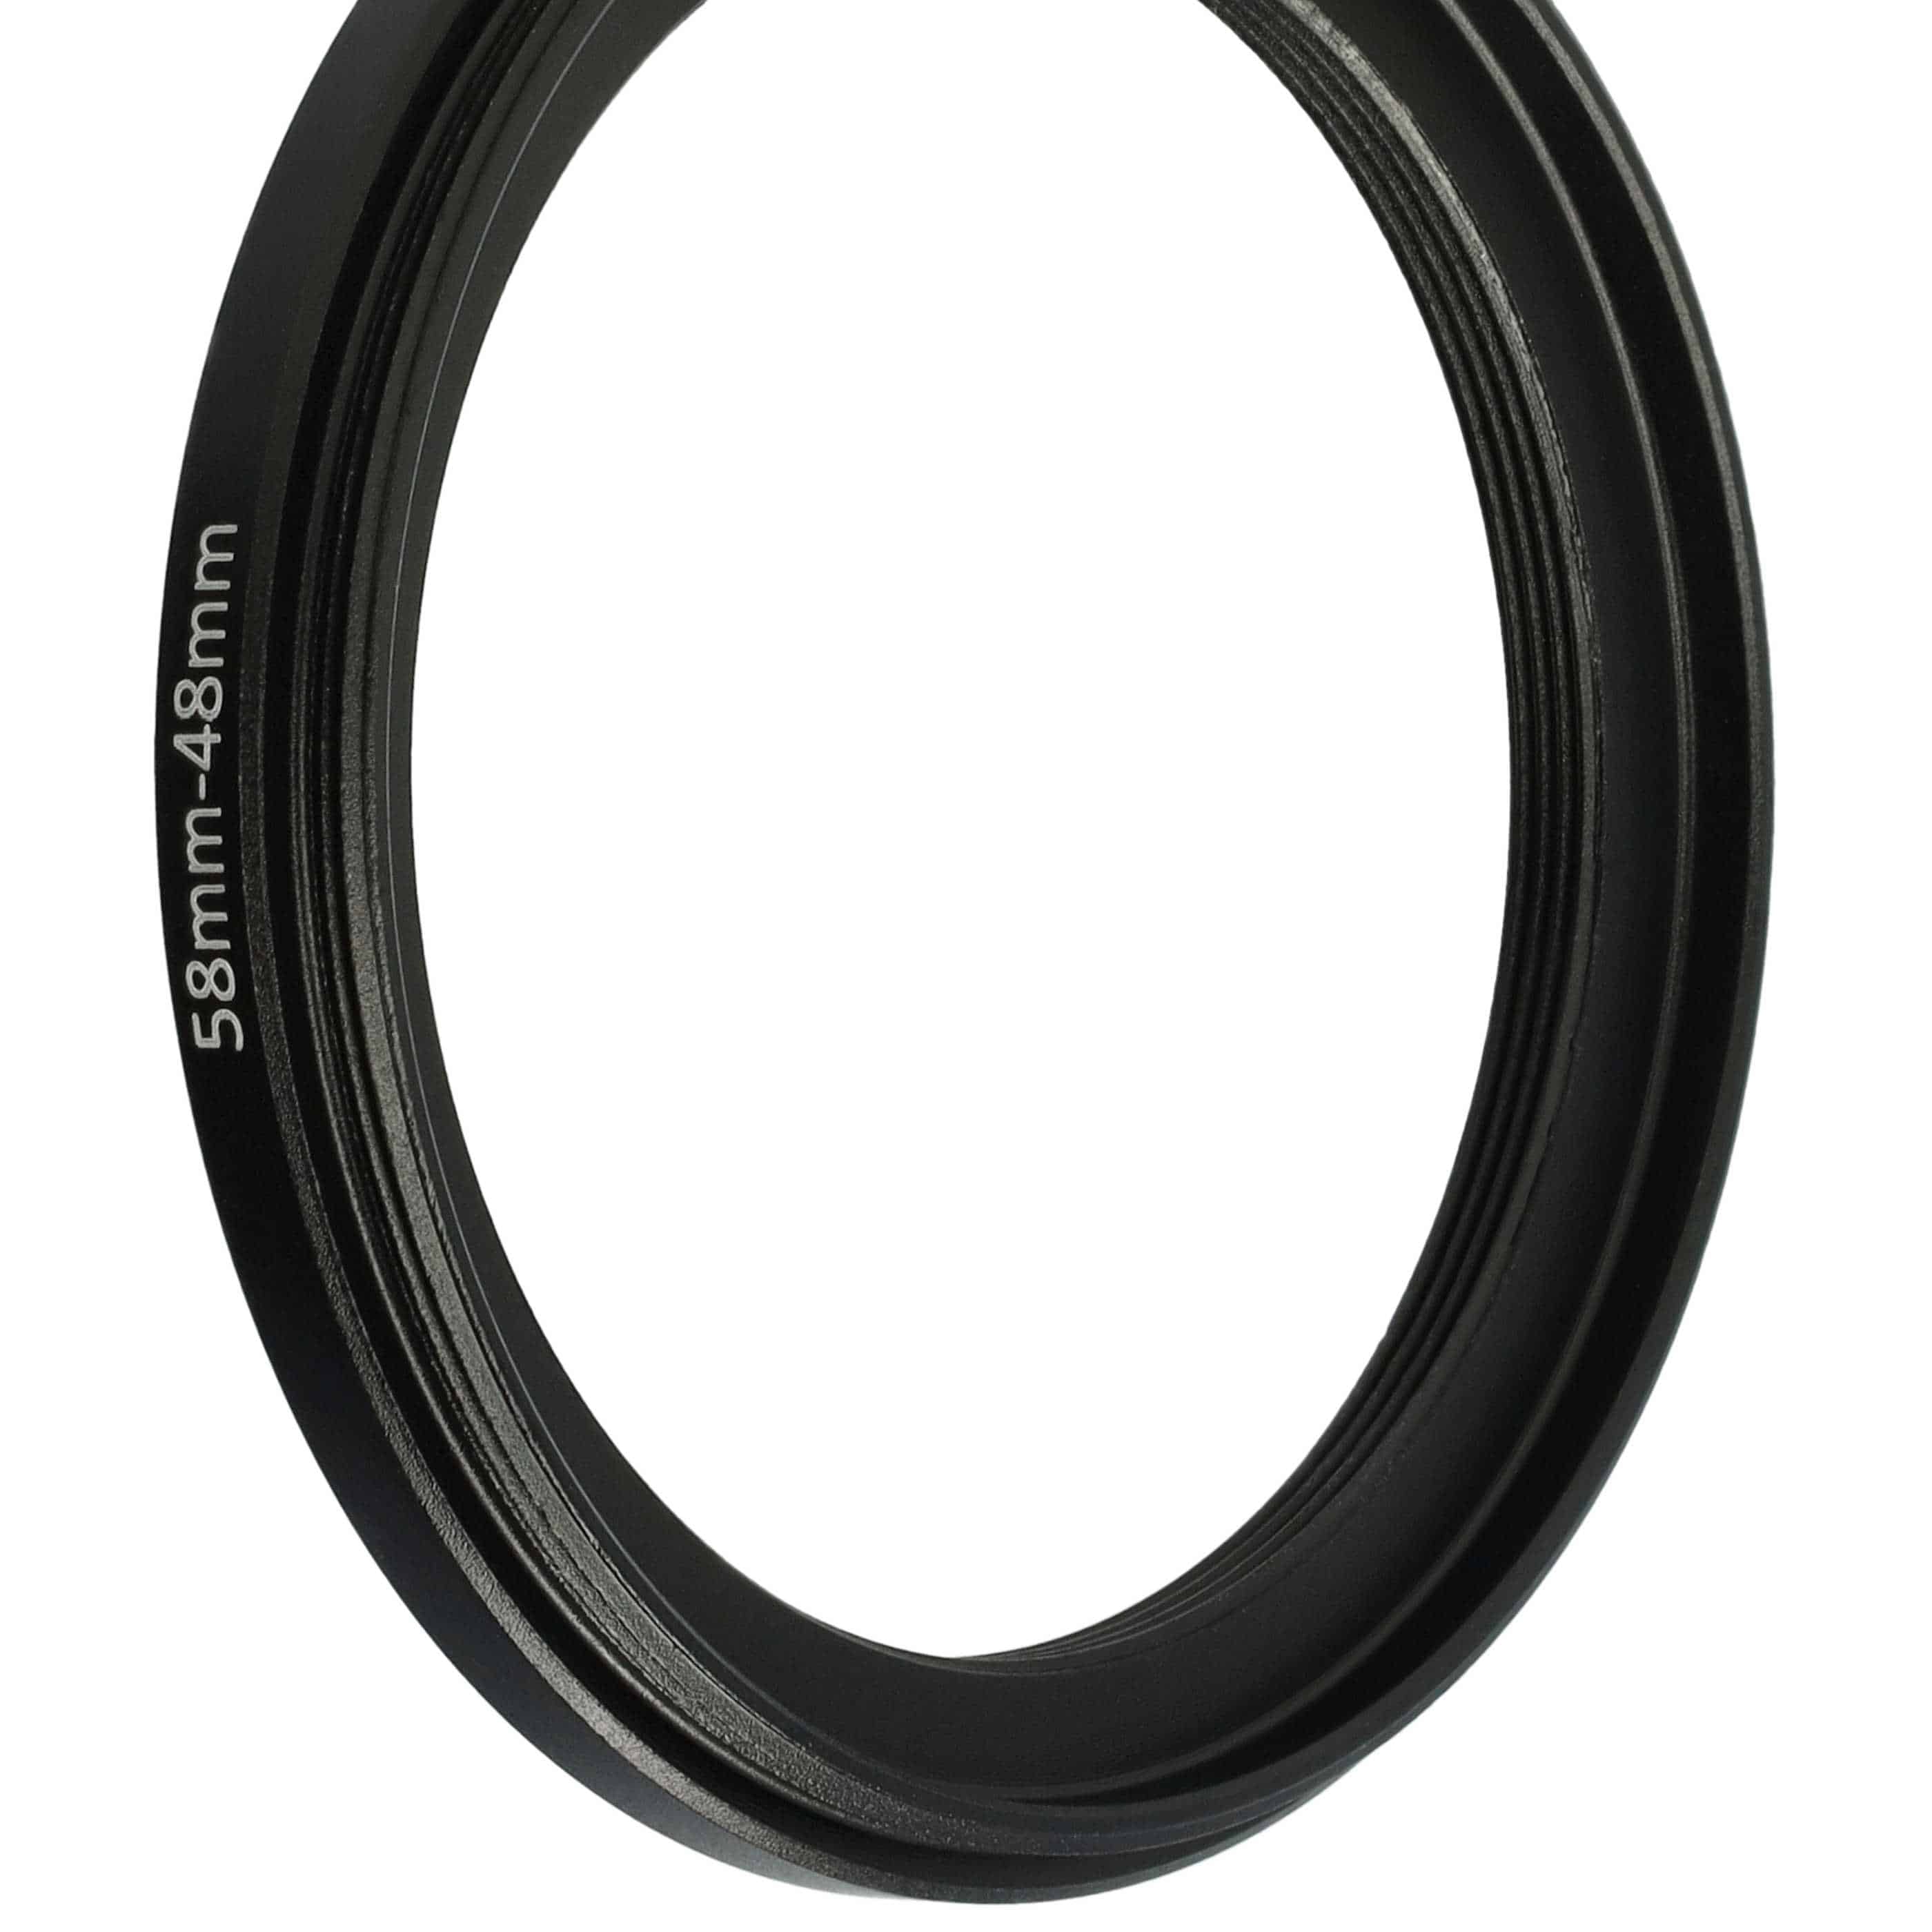 Step-Down Ring Adapter from 58 mm to 48 mm suitable for Camera Lens - Filter Adapter, metal